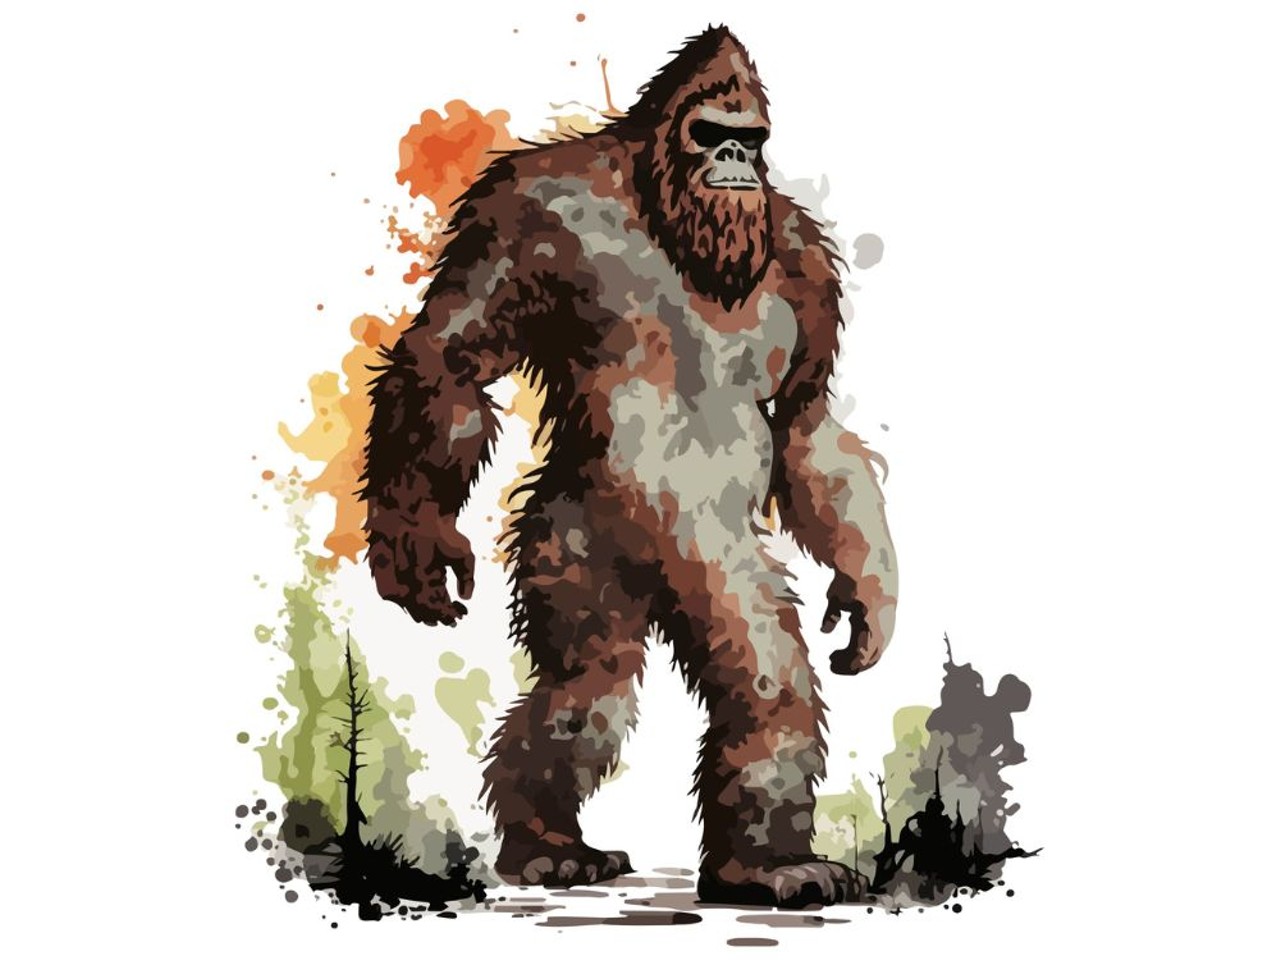 Bigfoot Sightings at Kelly Air Force Base
Some of y’all may think bigfoot only hangs out in the PNW, but the gargantuan apelike cryptid has been spotted all over the U.S., including Texas. In the 1970s, Sasquatch apparently swung down to SA, where he was spotted multiple times near Kelly AFB. According to cryptozoology blog Cryptomundo, the San Antonio Light ran an article in ‘76 covering the sightings. One man claimed to see a 7-foot tall furry monster run out of his backyard after being scared by a train whistle, and later a neighbor claimed she saw a smaller, similarly-furred creature that ran on two feet. Was Bigfoot taking a South Texas vacation with the kids? We may never know.